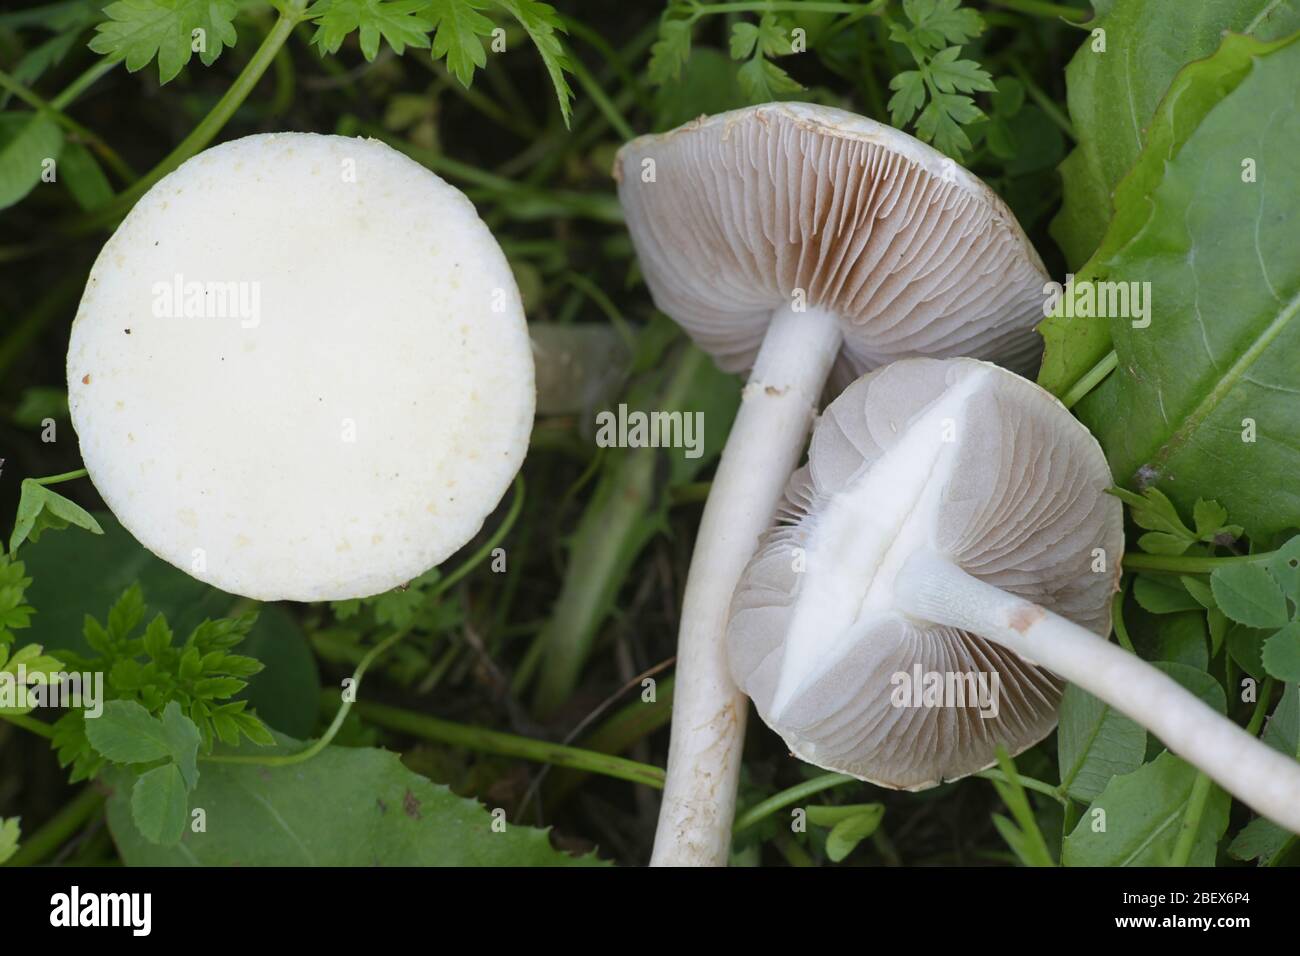 Agrocybe dura, known as the Bearded Fieldcap, growing wild in Finland Stock Photo